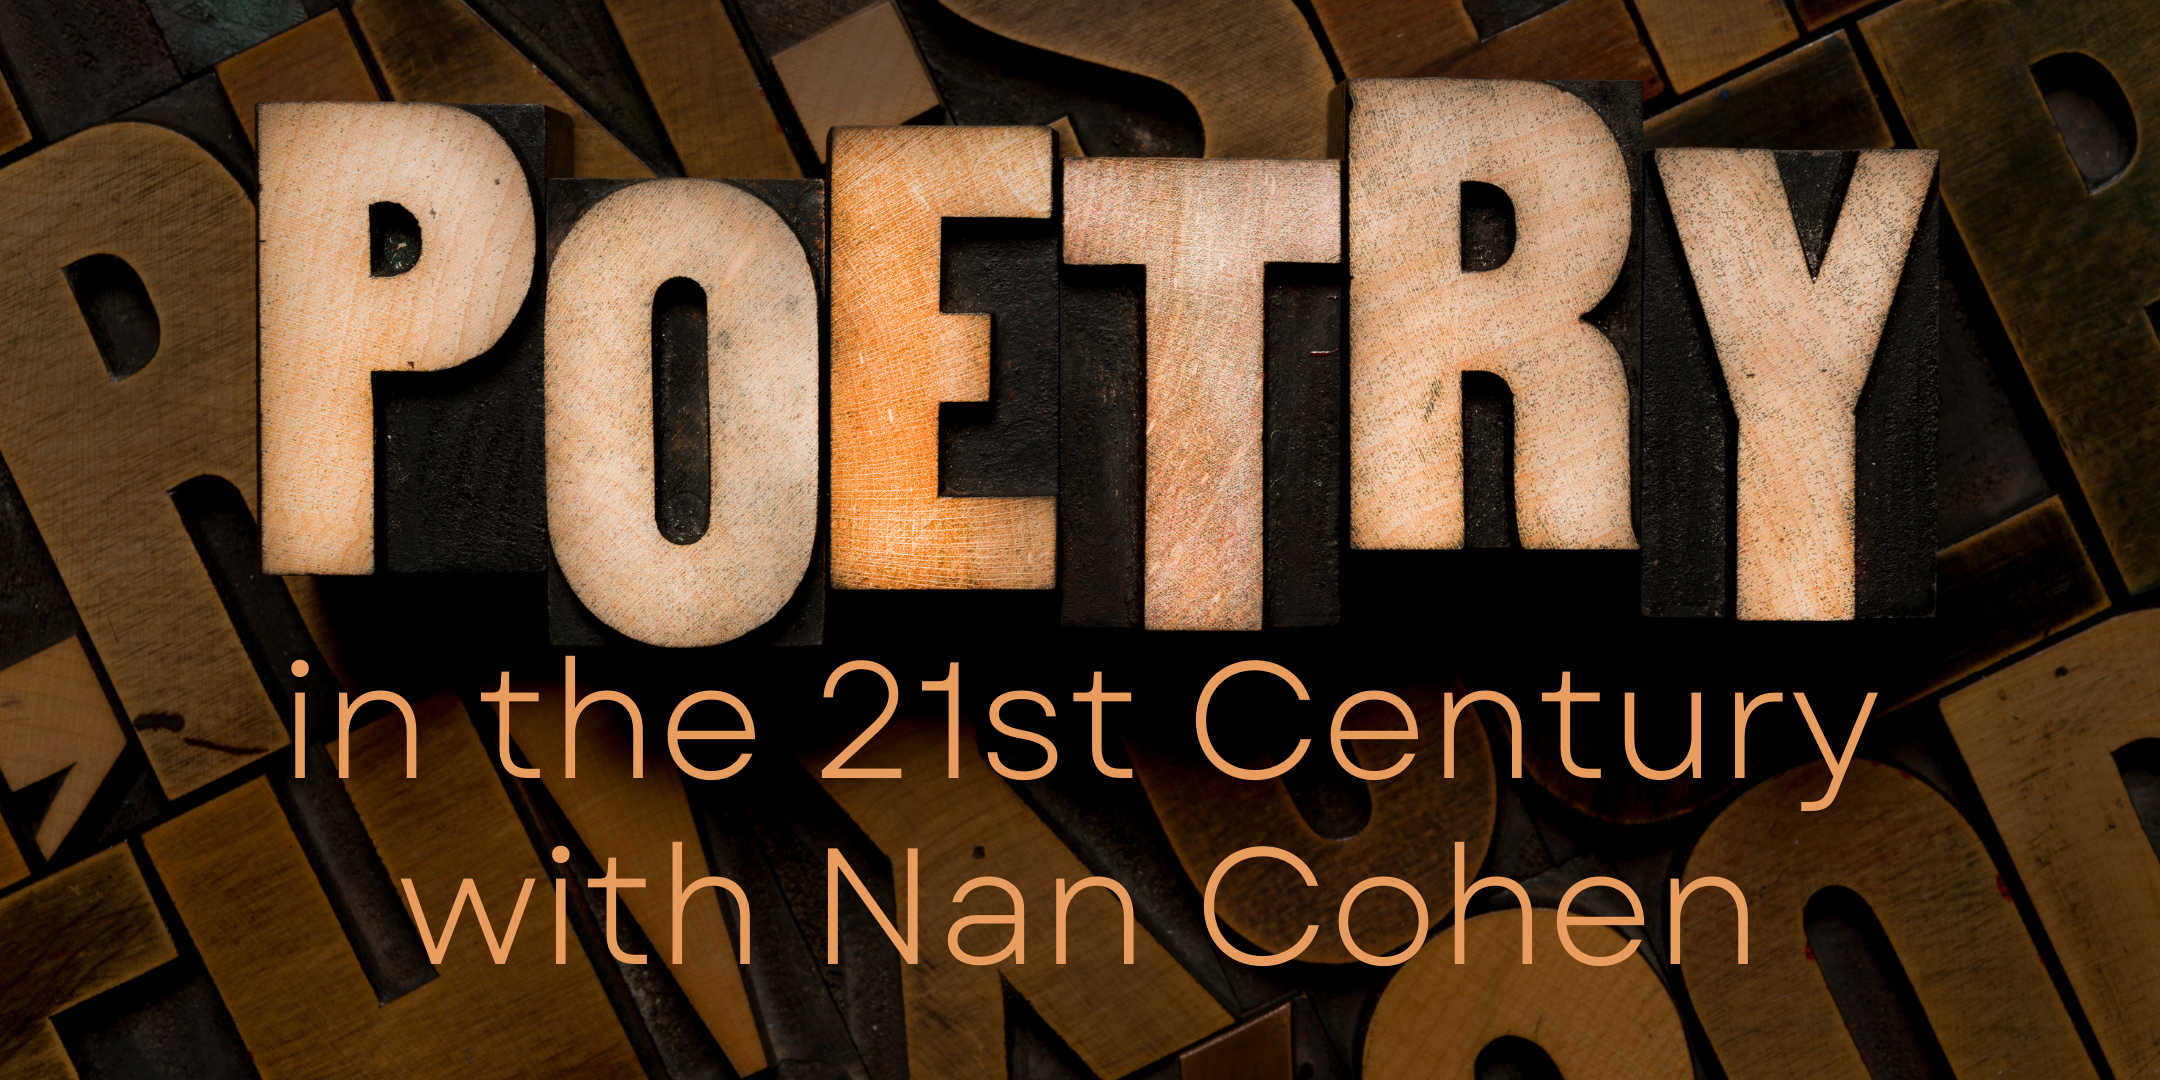 Poetry in the 21st Century with Nan Cohen event image